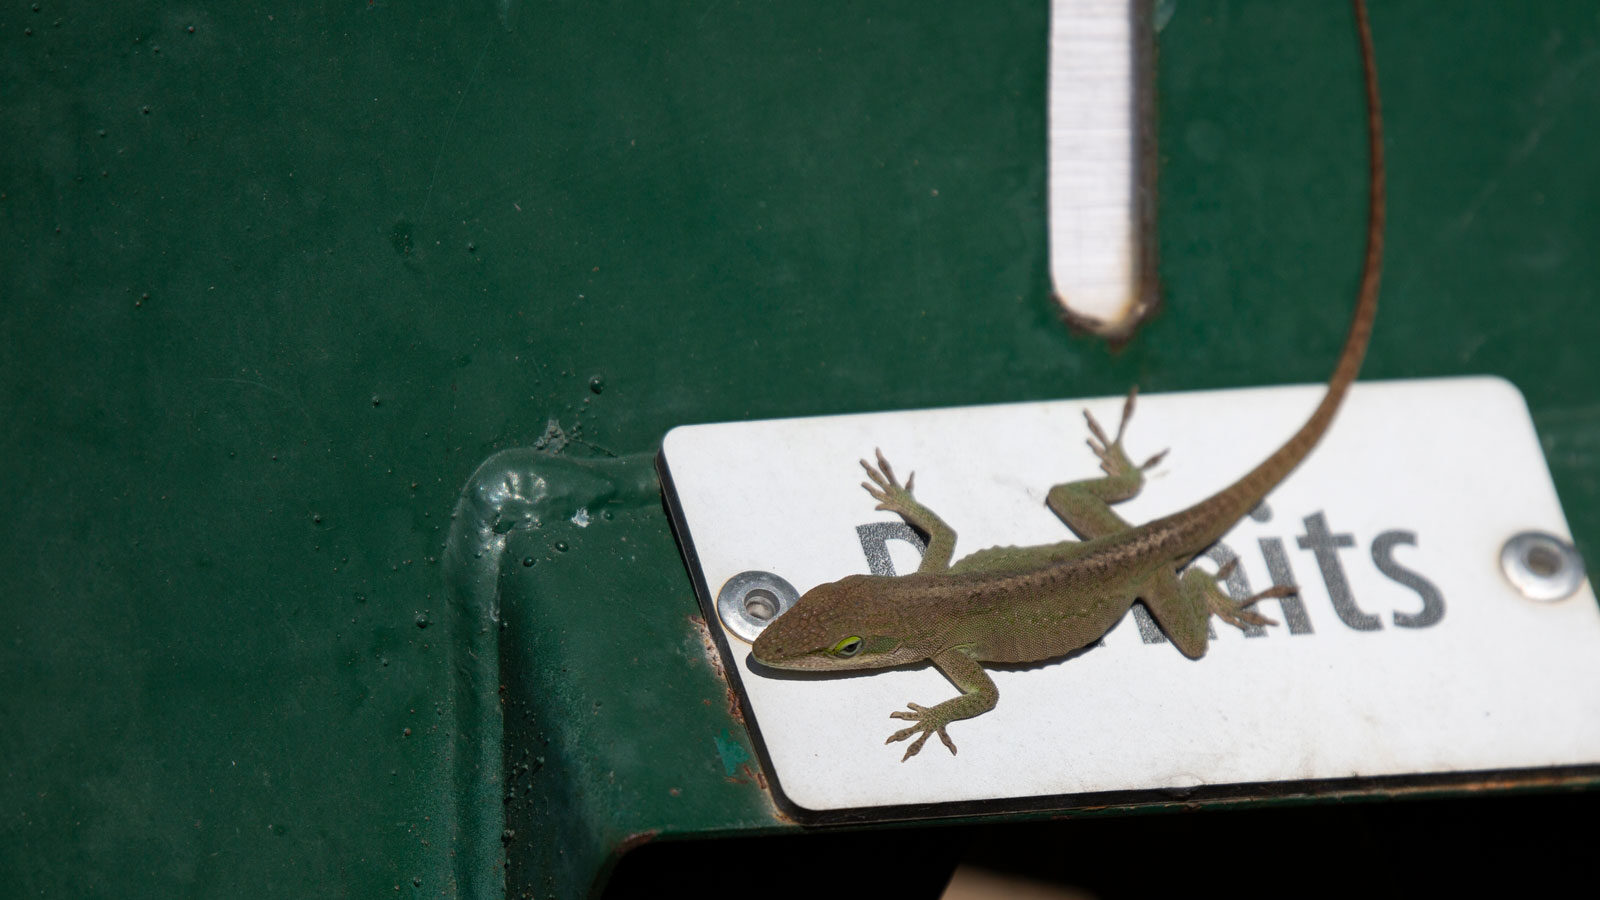 Green anole changing color on a permits box